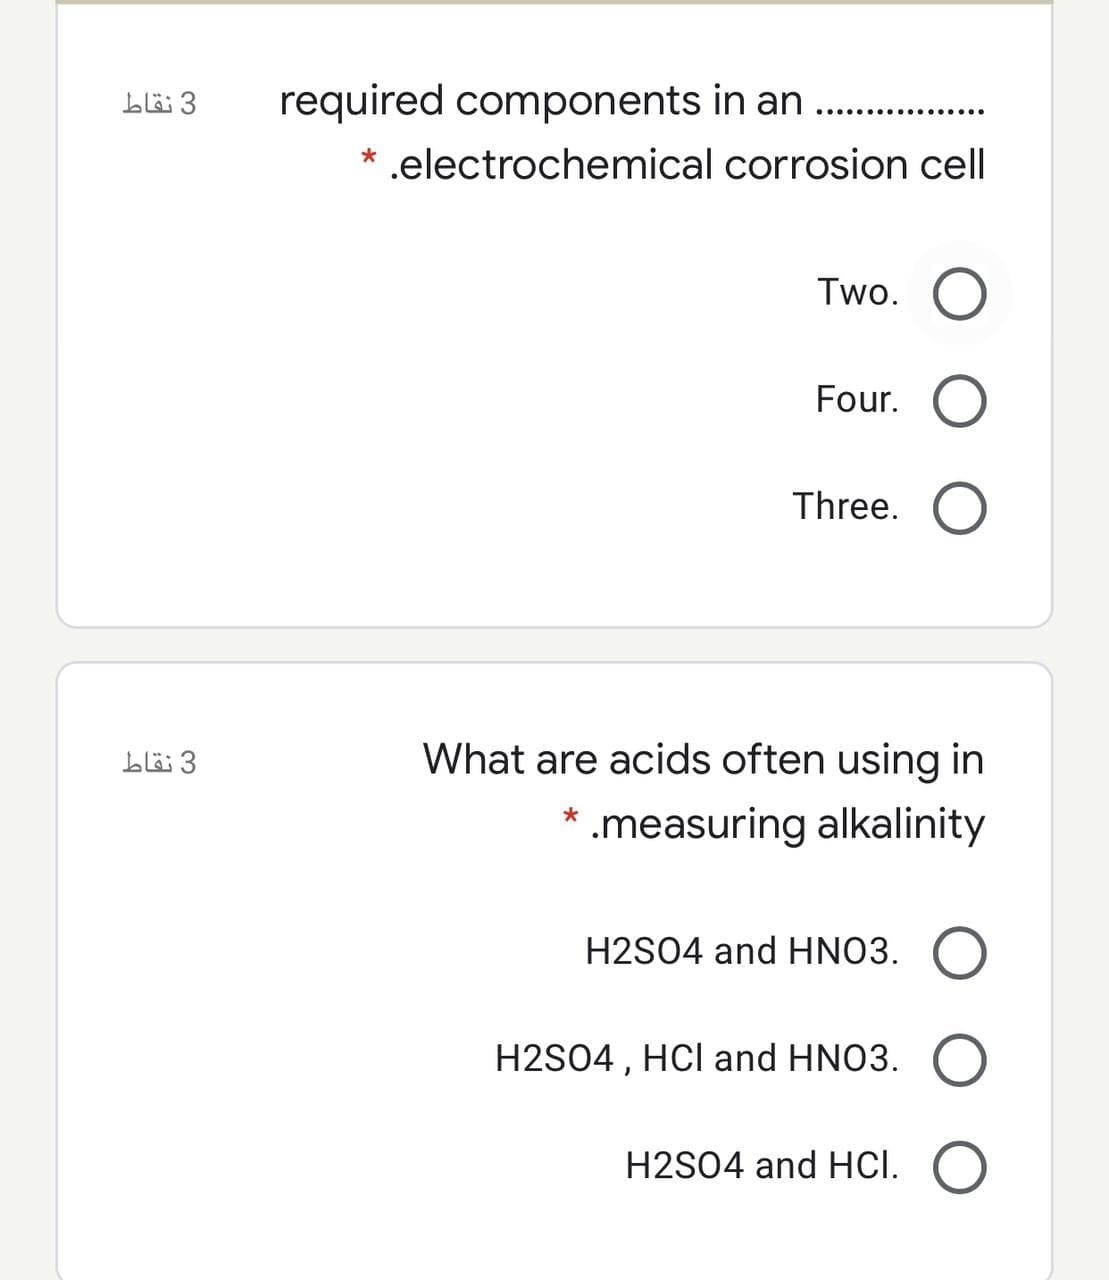 blö 3
required components in an
.electrochemical corrosion cell
Two. O
Four.
Three. O
3 نقاط
What are acids often using in
* .measuring alkalinity
H2S04 and HNO3.
H2S04 , HCI and HNO3. O.
H2S04 and HCI.
